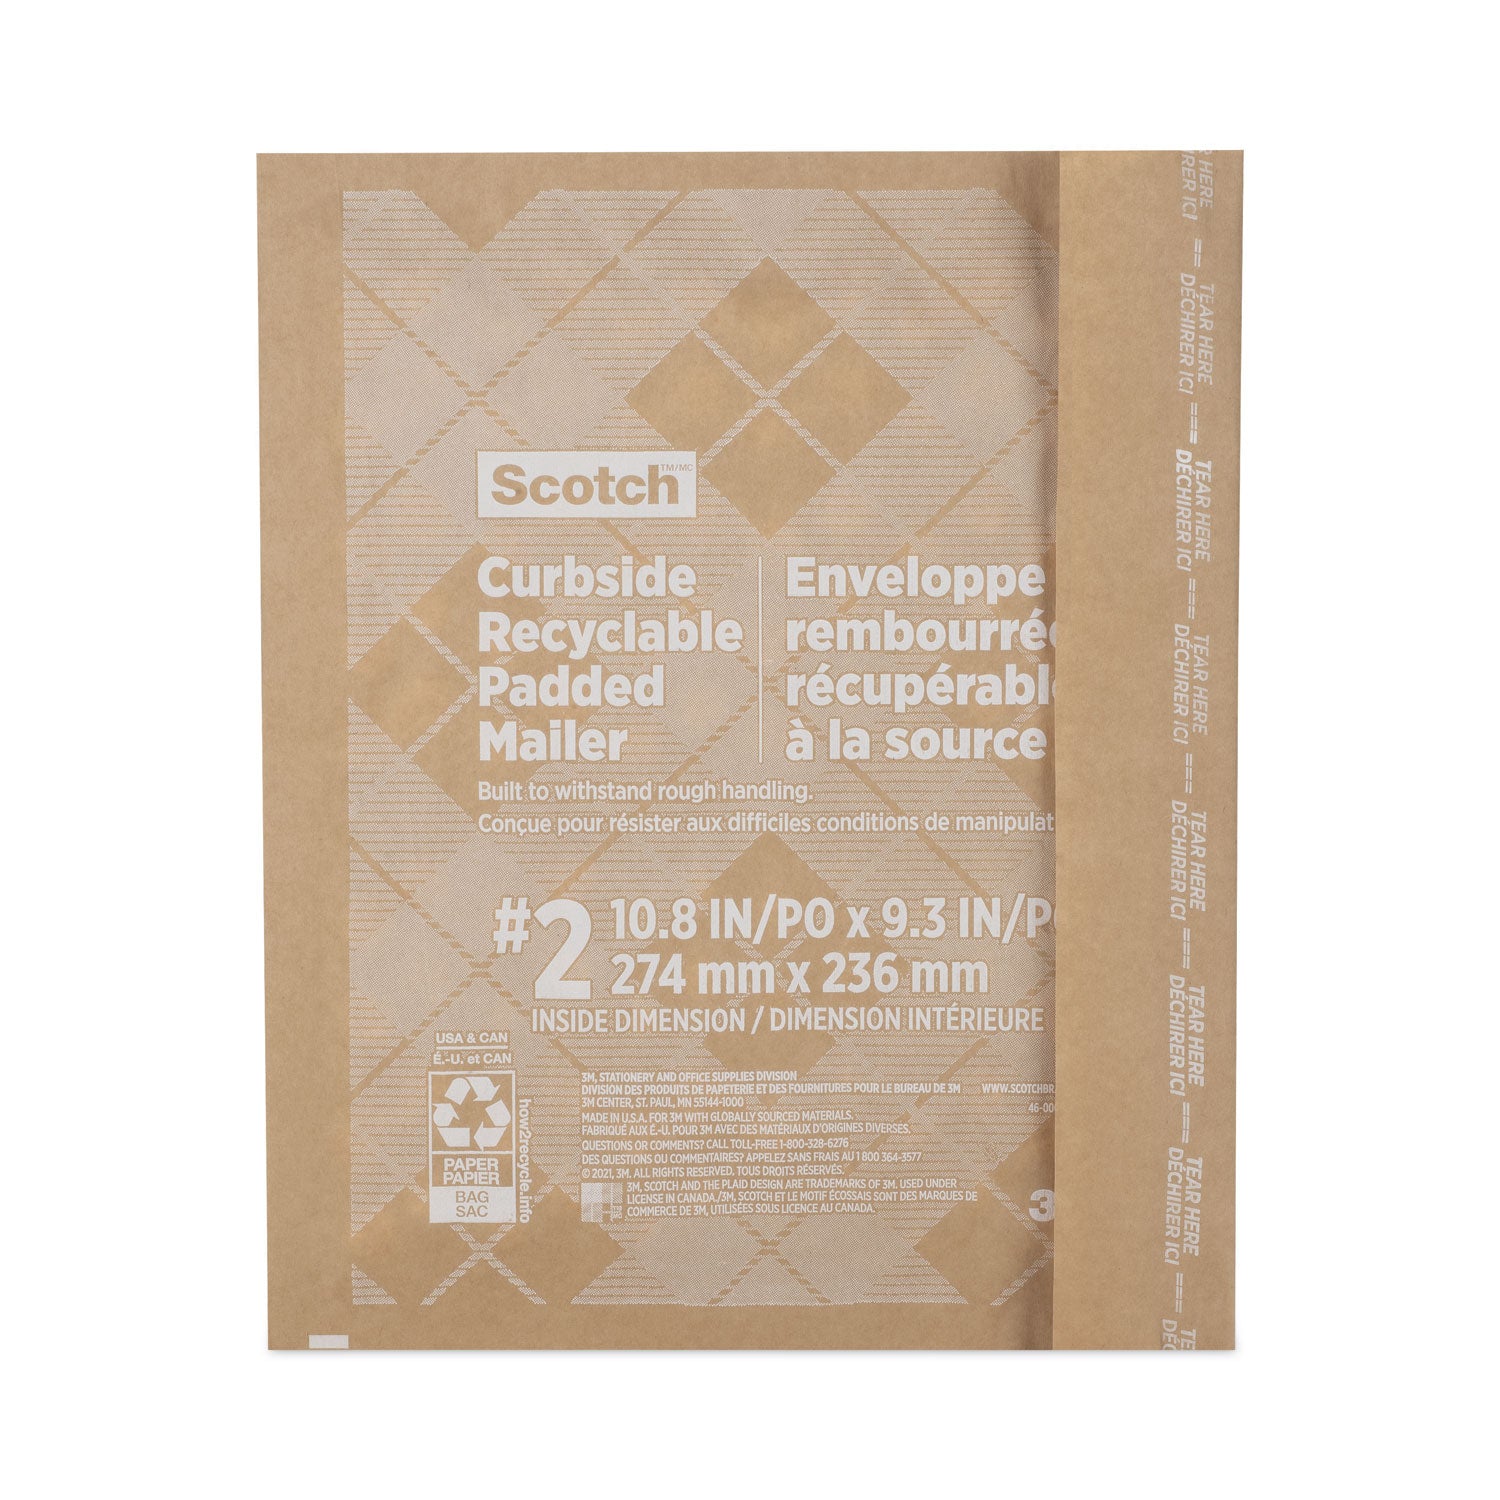 curbside-recyclable-padded-mailer-#2-bubble-cushion-self-adhesive-closure-1125-x-12-natural-kraft-100-carton_mmmcr21 - 2